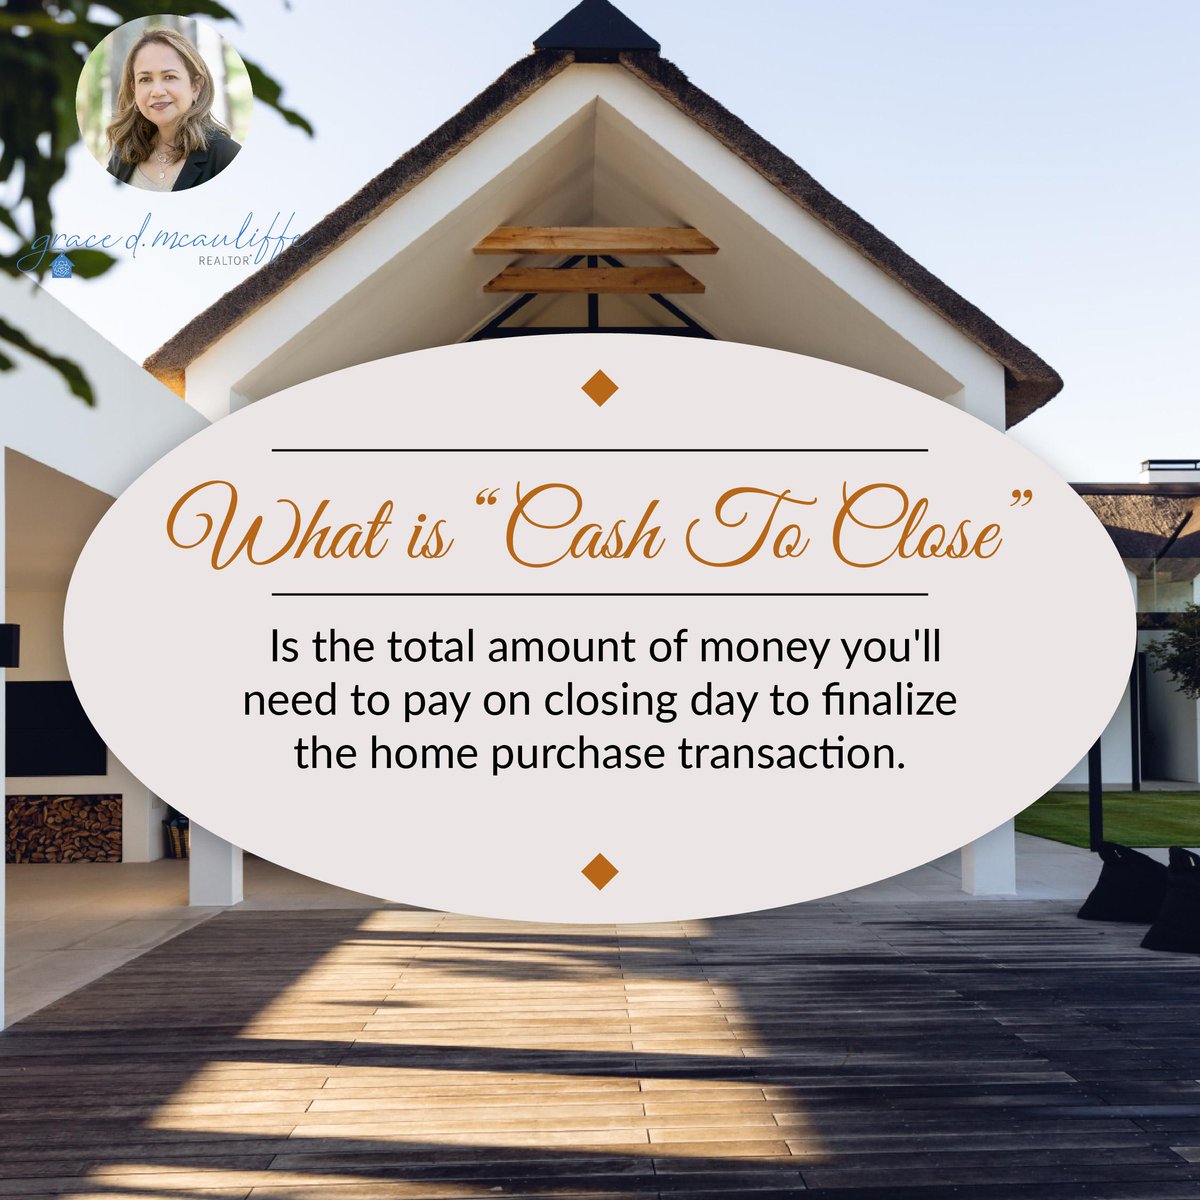 Have you heard of “Cash to Close”? Here’s what it is! #EducationalFacts #Mortgage #CashToClose #RealEstate